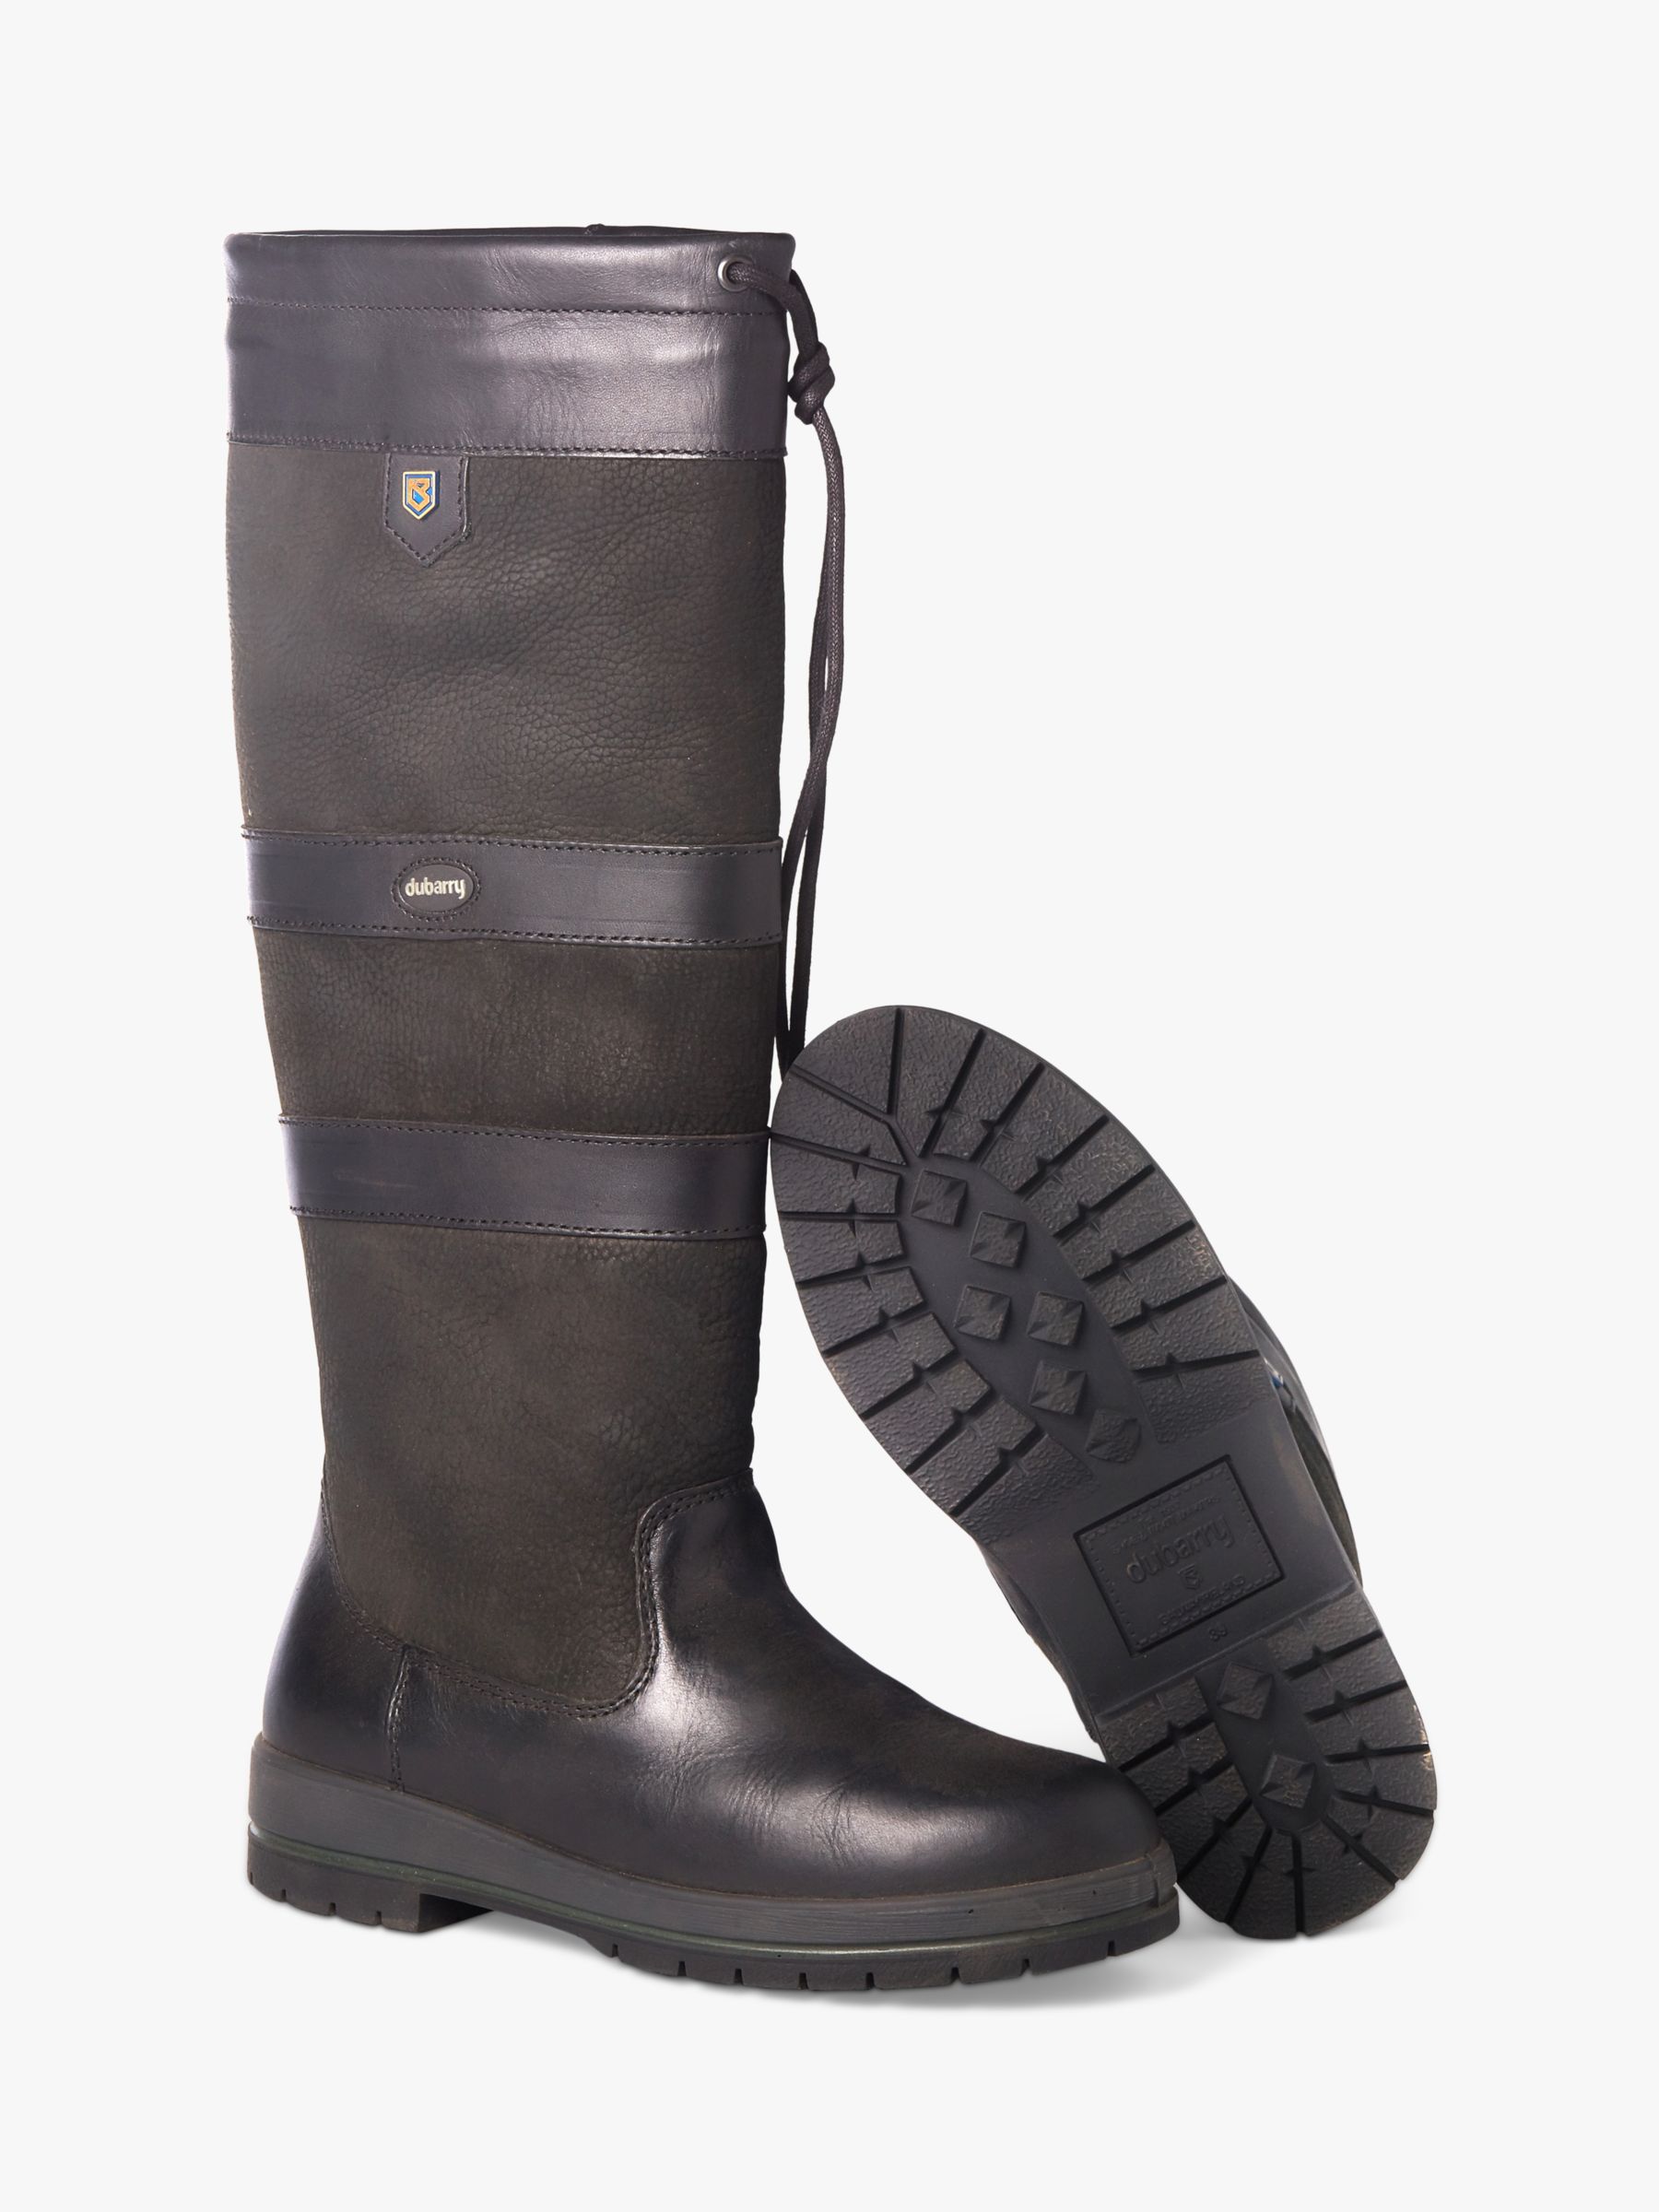 Dubarry Galway Leather Knee Boots, Black at Lewis & Partners